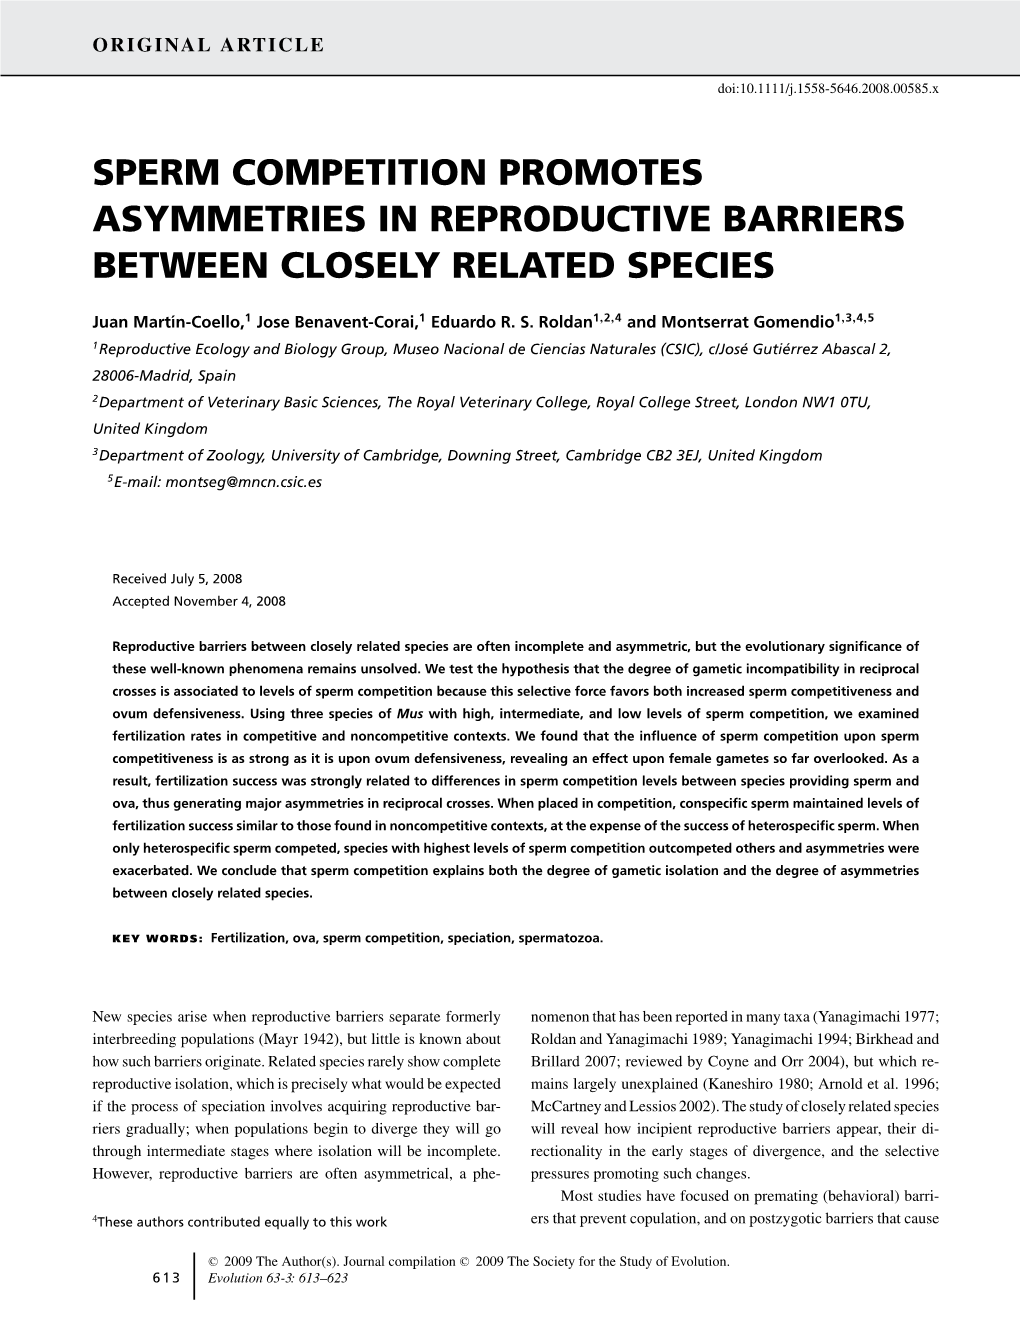 Sperm Competition Promotes Asymmetries in Reproductive Barriers Between Closely Related Species